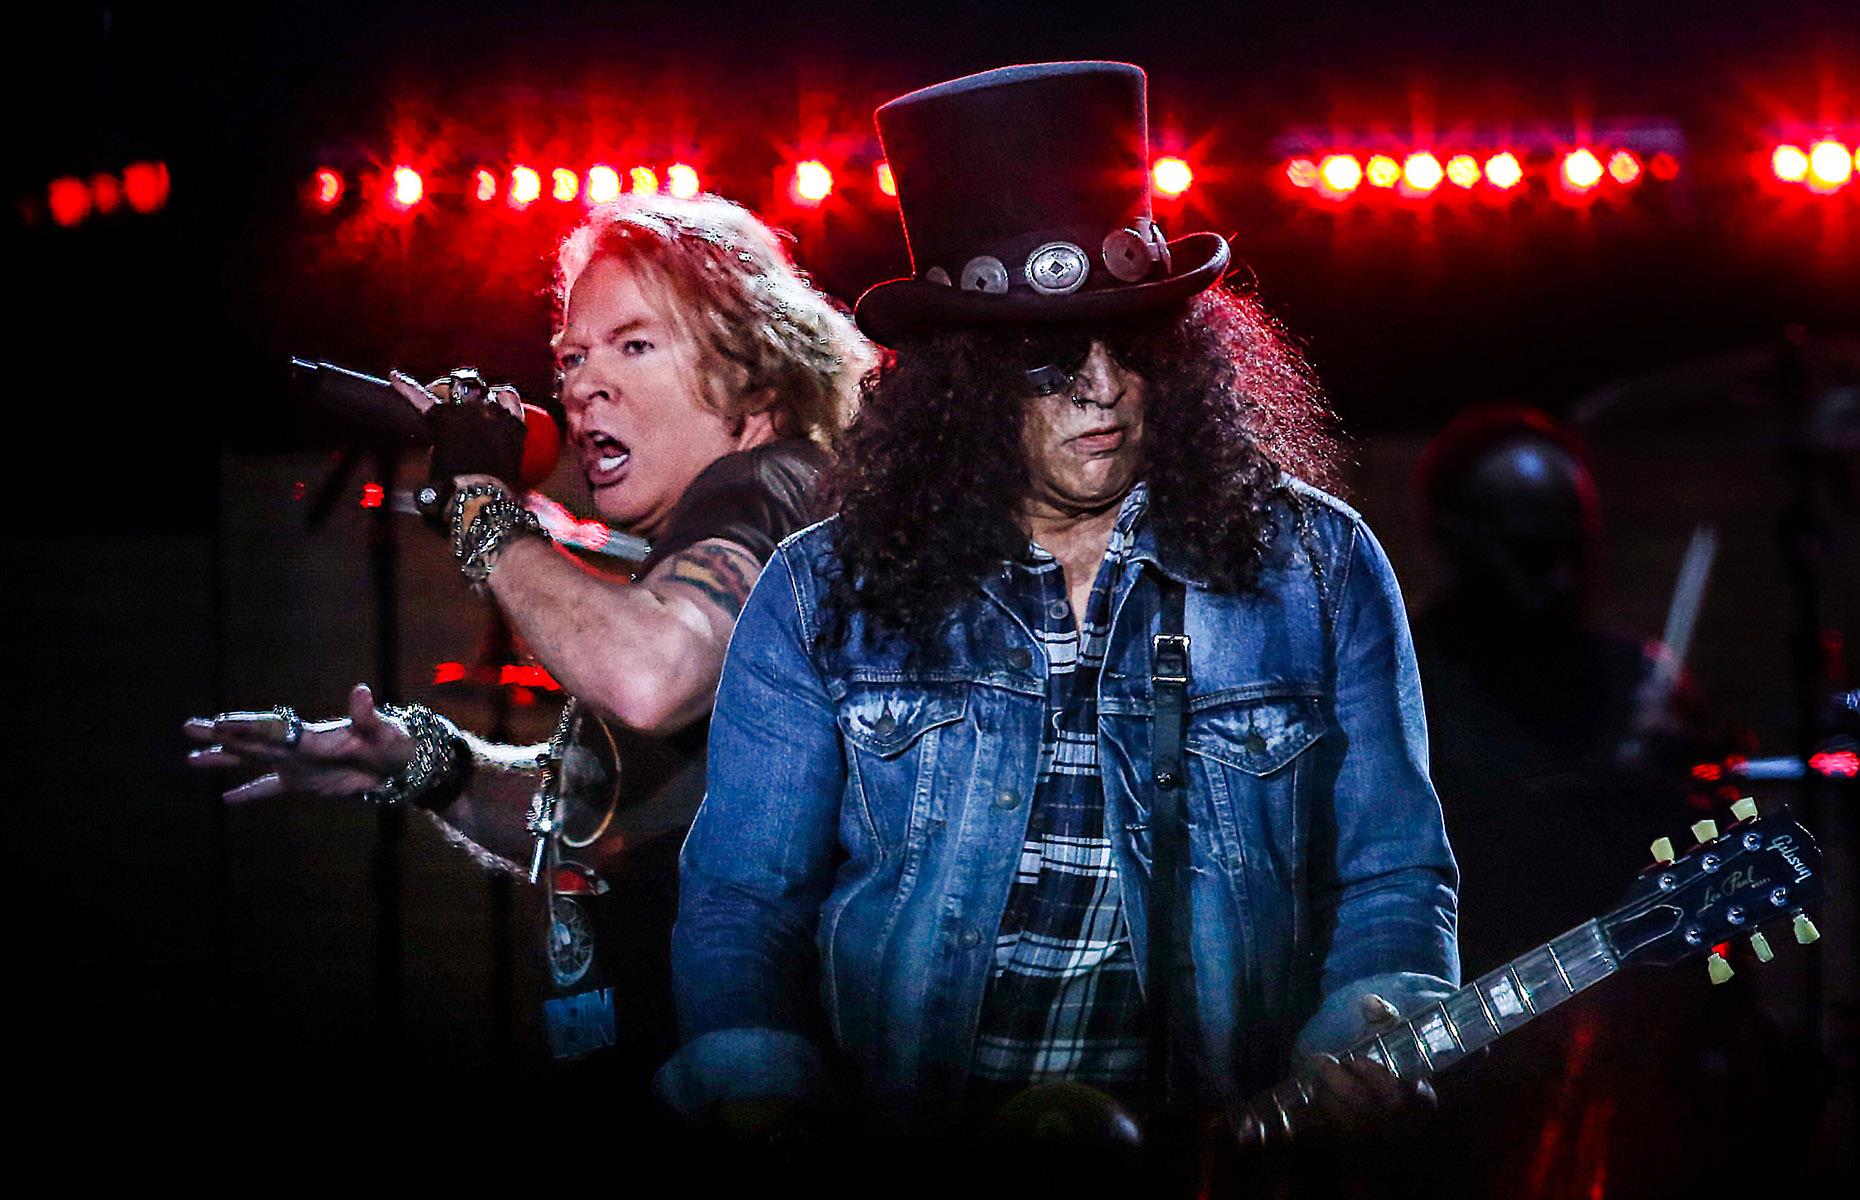 <p>Rock veterans Guns N' Roses embarked on a landmark reunion tour in 2016, titled <em>Not in This Lifetime... Tour</em>. It marked the first time that Axl Rose, Slash, and Duff McKagan had performed together on stage since the band's <em>Use Your Illusion Tour</em> in 1993.</p>  <p>Unsurprisingly, fans were desperate to witness the band's long-awaited reunion, with around 5.3 million tickets snapped up. Over a three-and-a-half-year period, Guns N' Roses rocked audiences across a staggering 158 shows spanning six continents, with the tour grossing $584.2 million.</p>  <p>In today's money, that's an incredible $725 million, making it the band's most lucrative tour ever.</p>